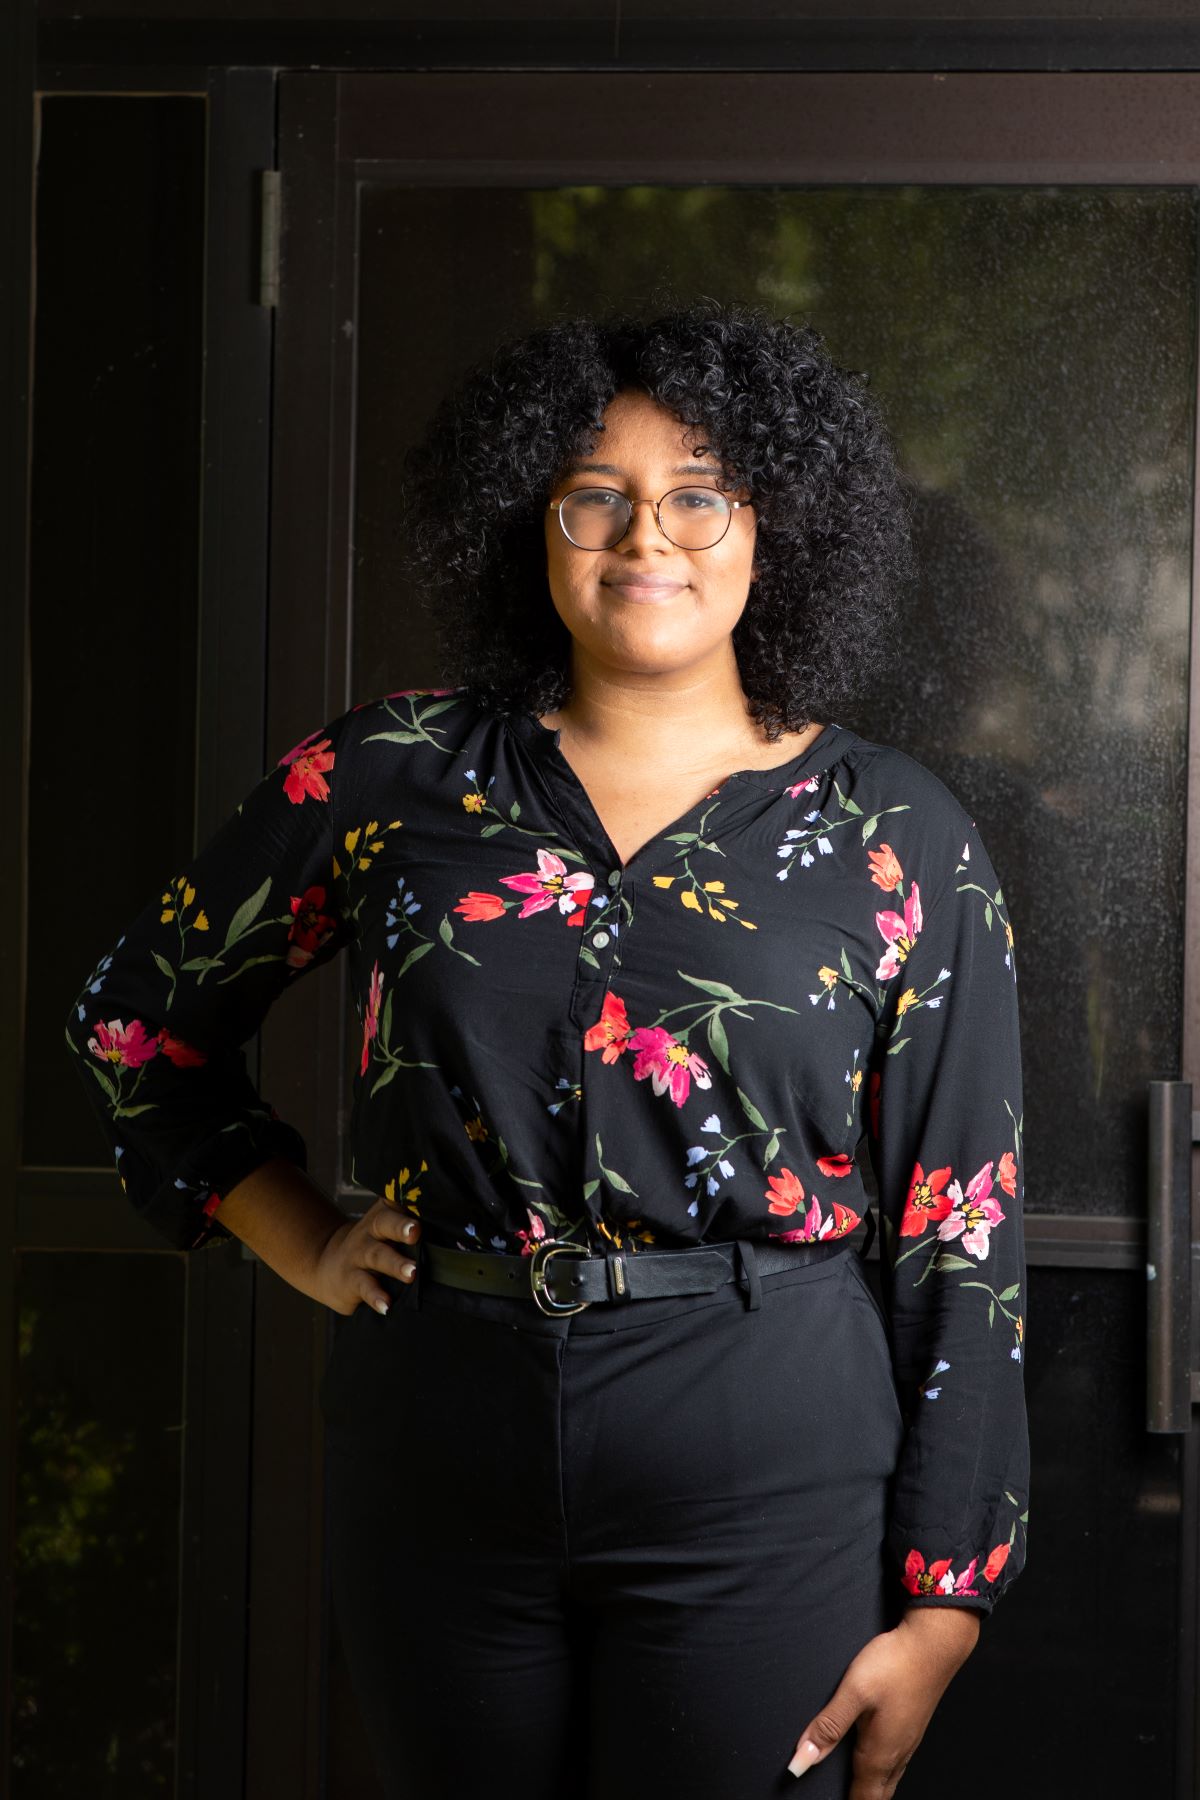 Kenya Burton, 2022 CSU Trustees’ Award for Outstanding Achievement recipient, poses with one hand on her hip on a black studio background wearing a black shirt adorned with flowers.